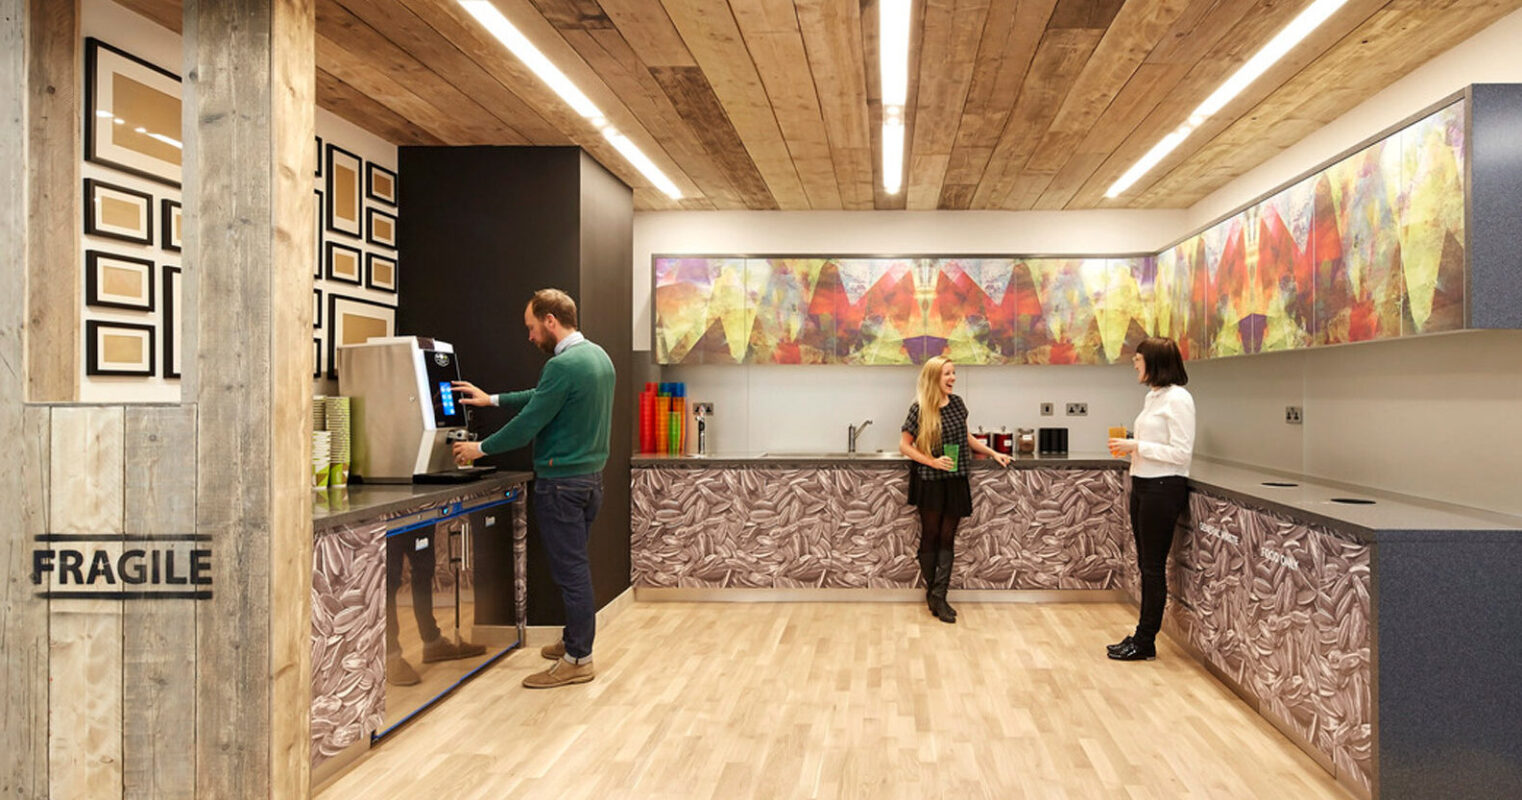 Contemporary office lobby featuring a rustic wood paneled reception desk with abstract textured front panels. Above, a geometric wooden ceiling installation mimics the angular lines of the blue carpet below, complementing the vibrant abstract wall art and creating a dynamic, inviting entrance space.